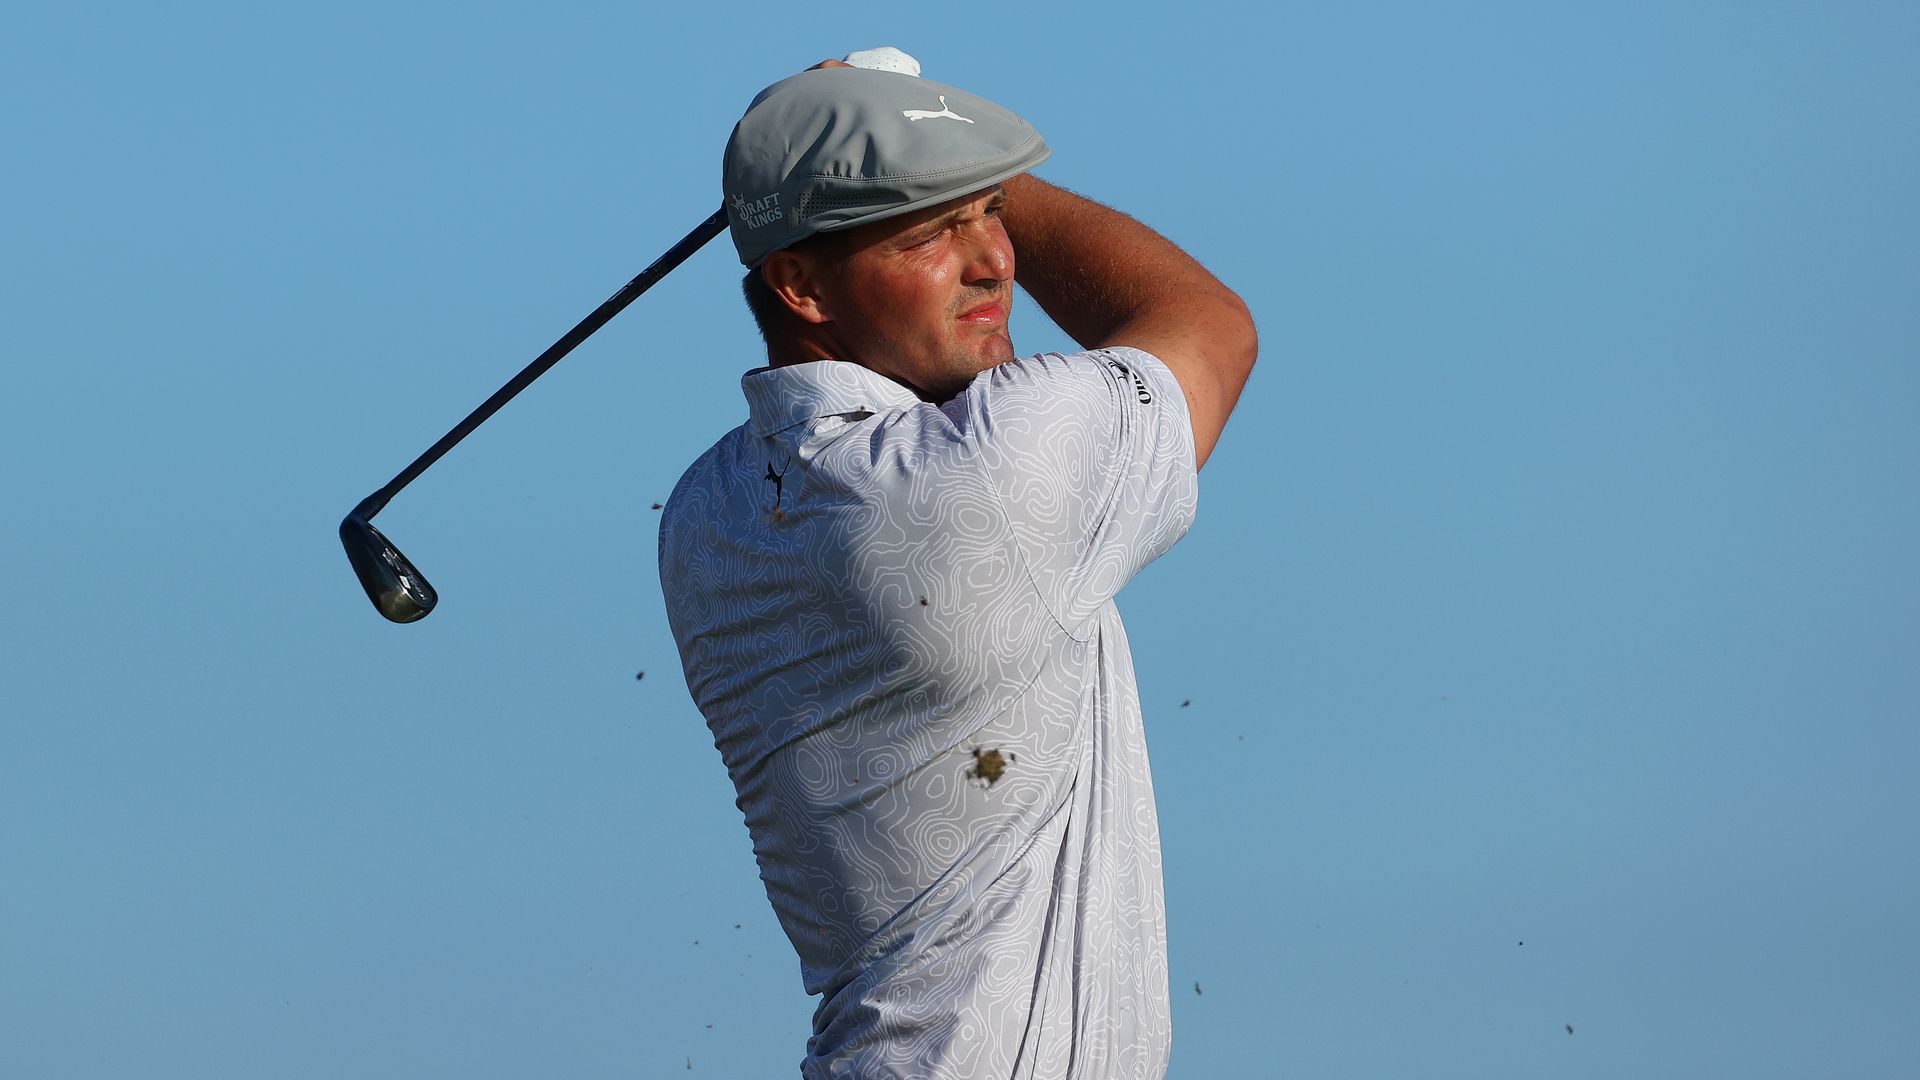 Bryson DeChambeau of the United States on the 18th tee during Day Two of The 149th Open at Royal St George’s Golf Club on July 16, 2021 in Sandwich, England. 